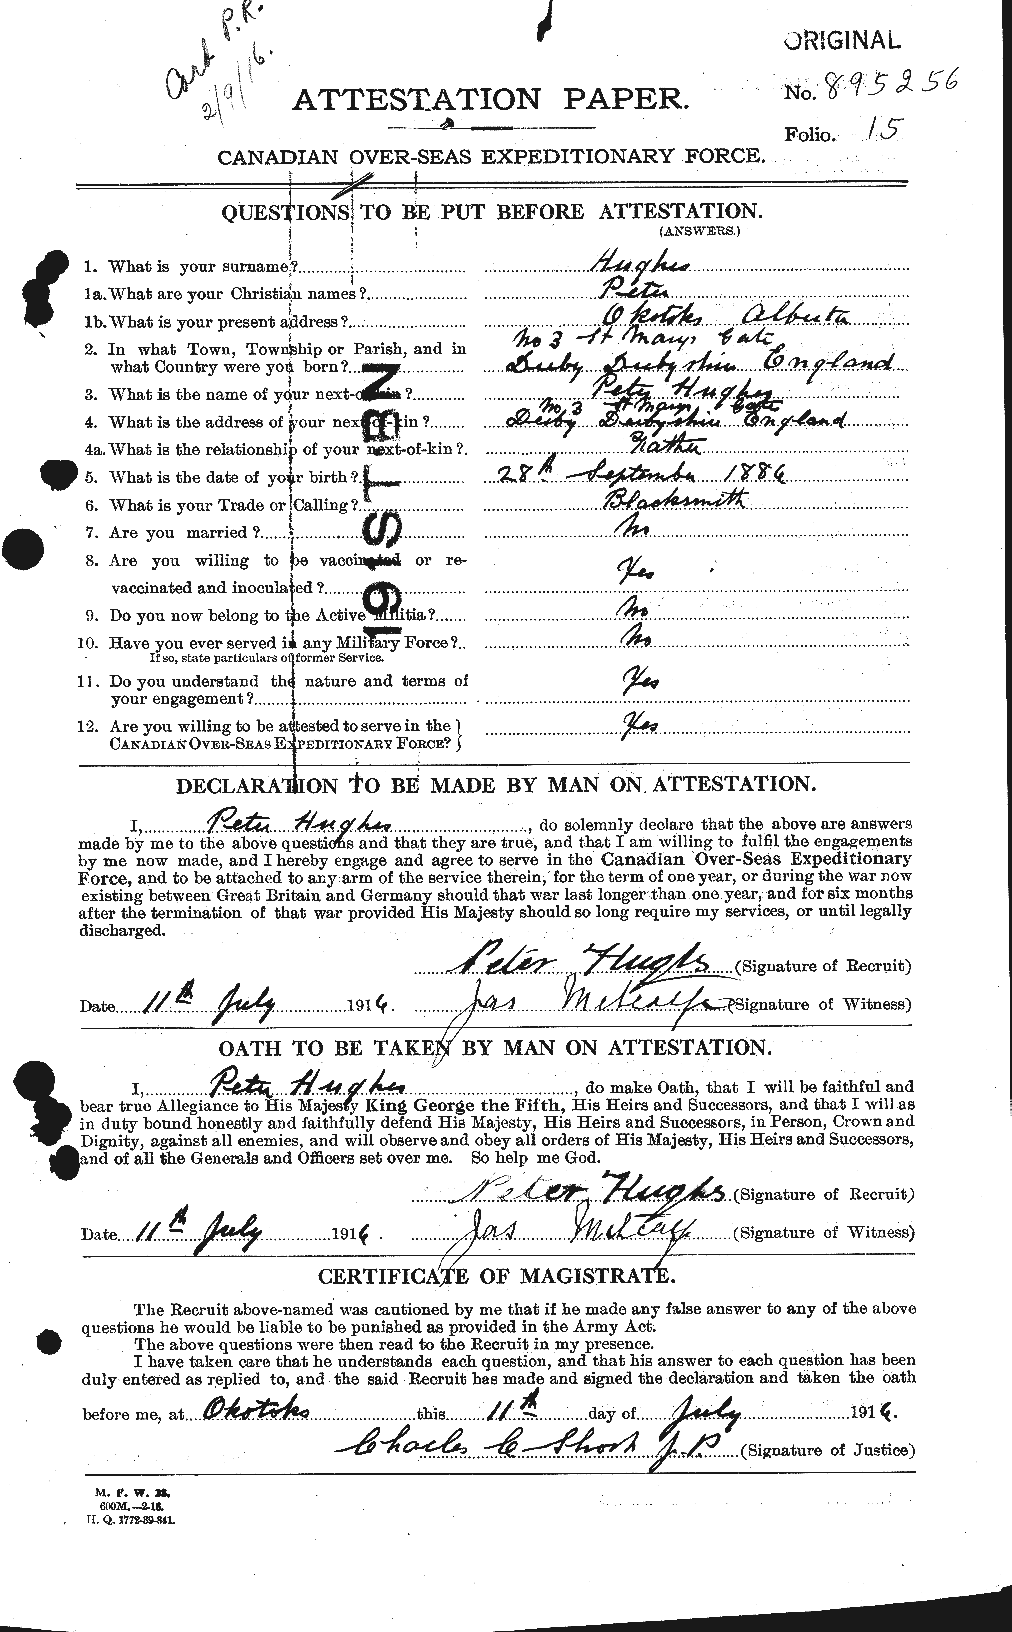 Personnel Records of the First World War - CEF 404162a